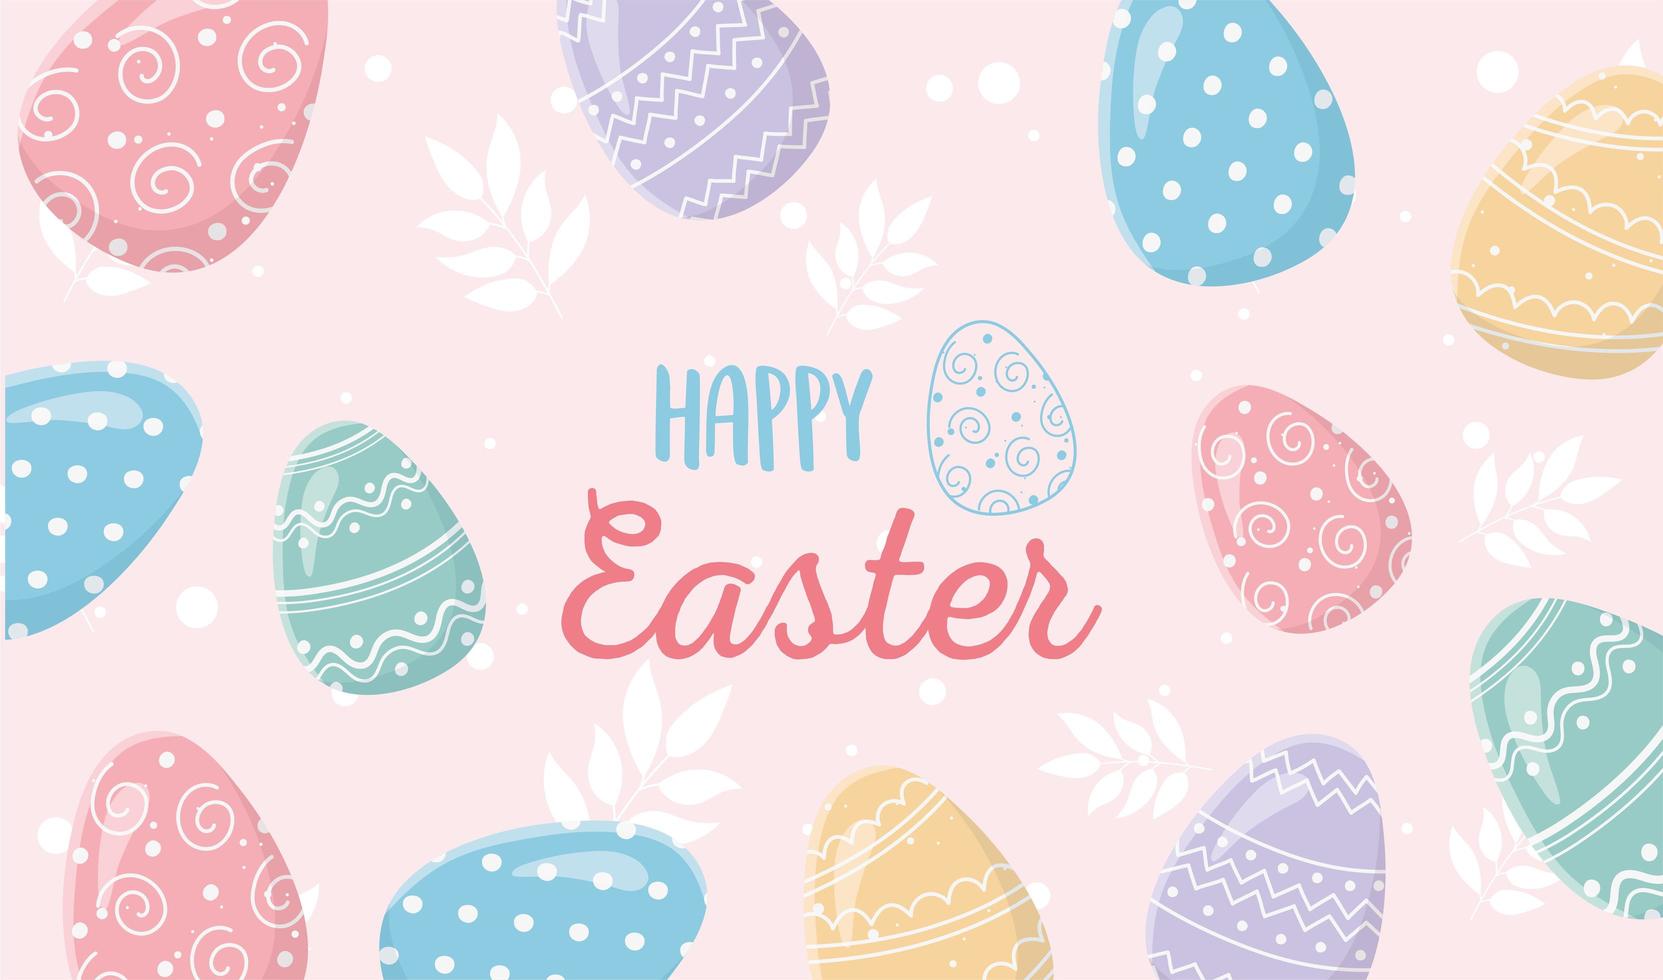 Happy Easter celebration banner with eggs vector